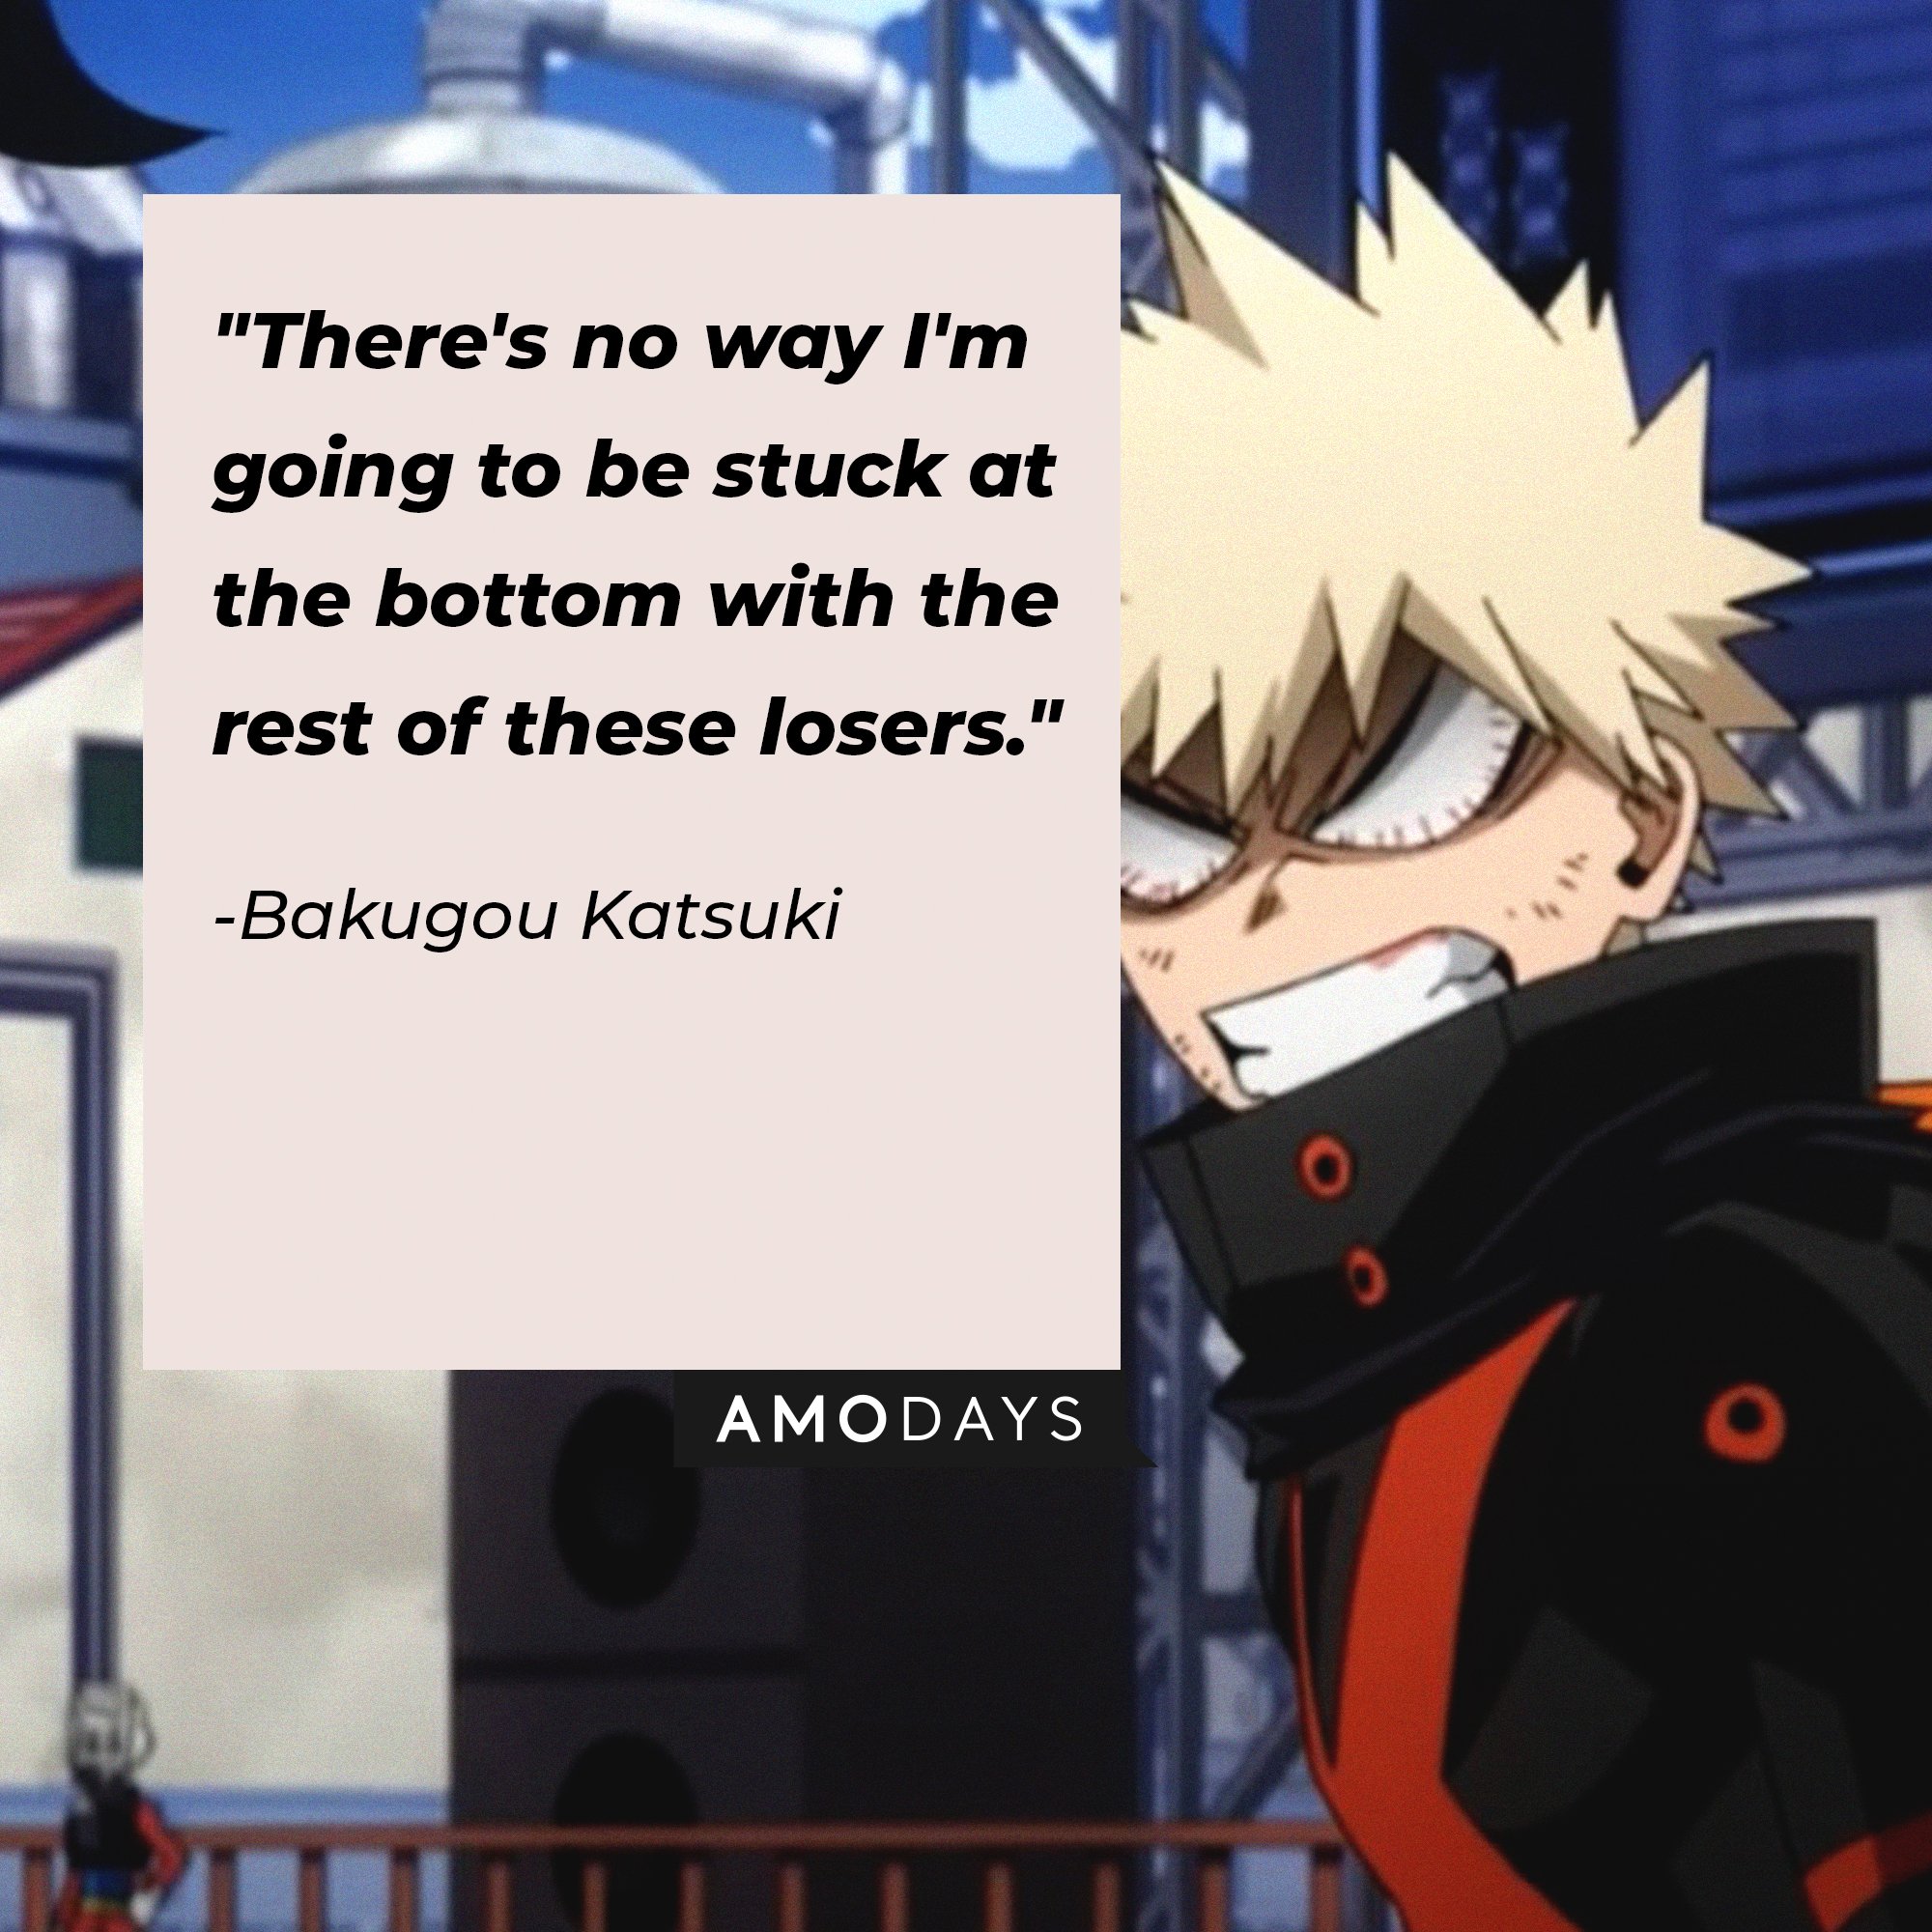 Bakugou Katsuki’s quote: "There's no way I'm going to be stuck at the bottom with the rest of these losers." | Image: AmoDays